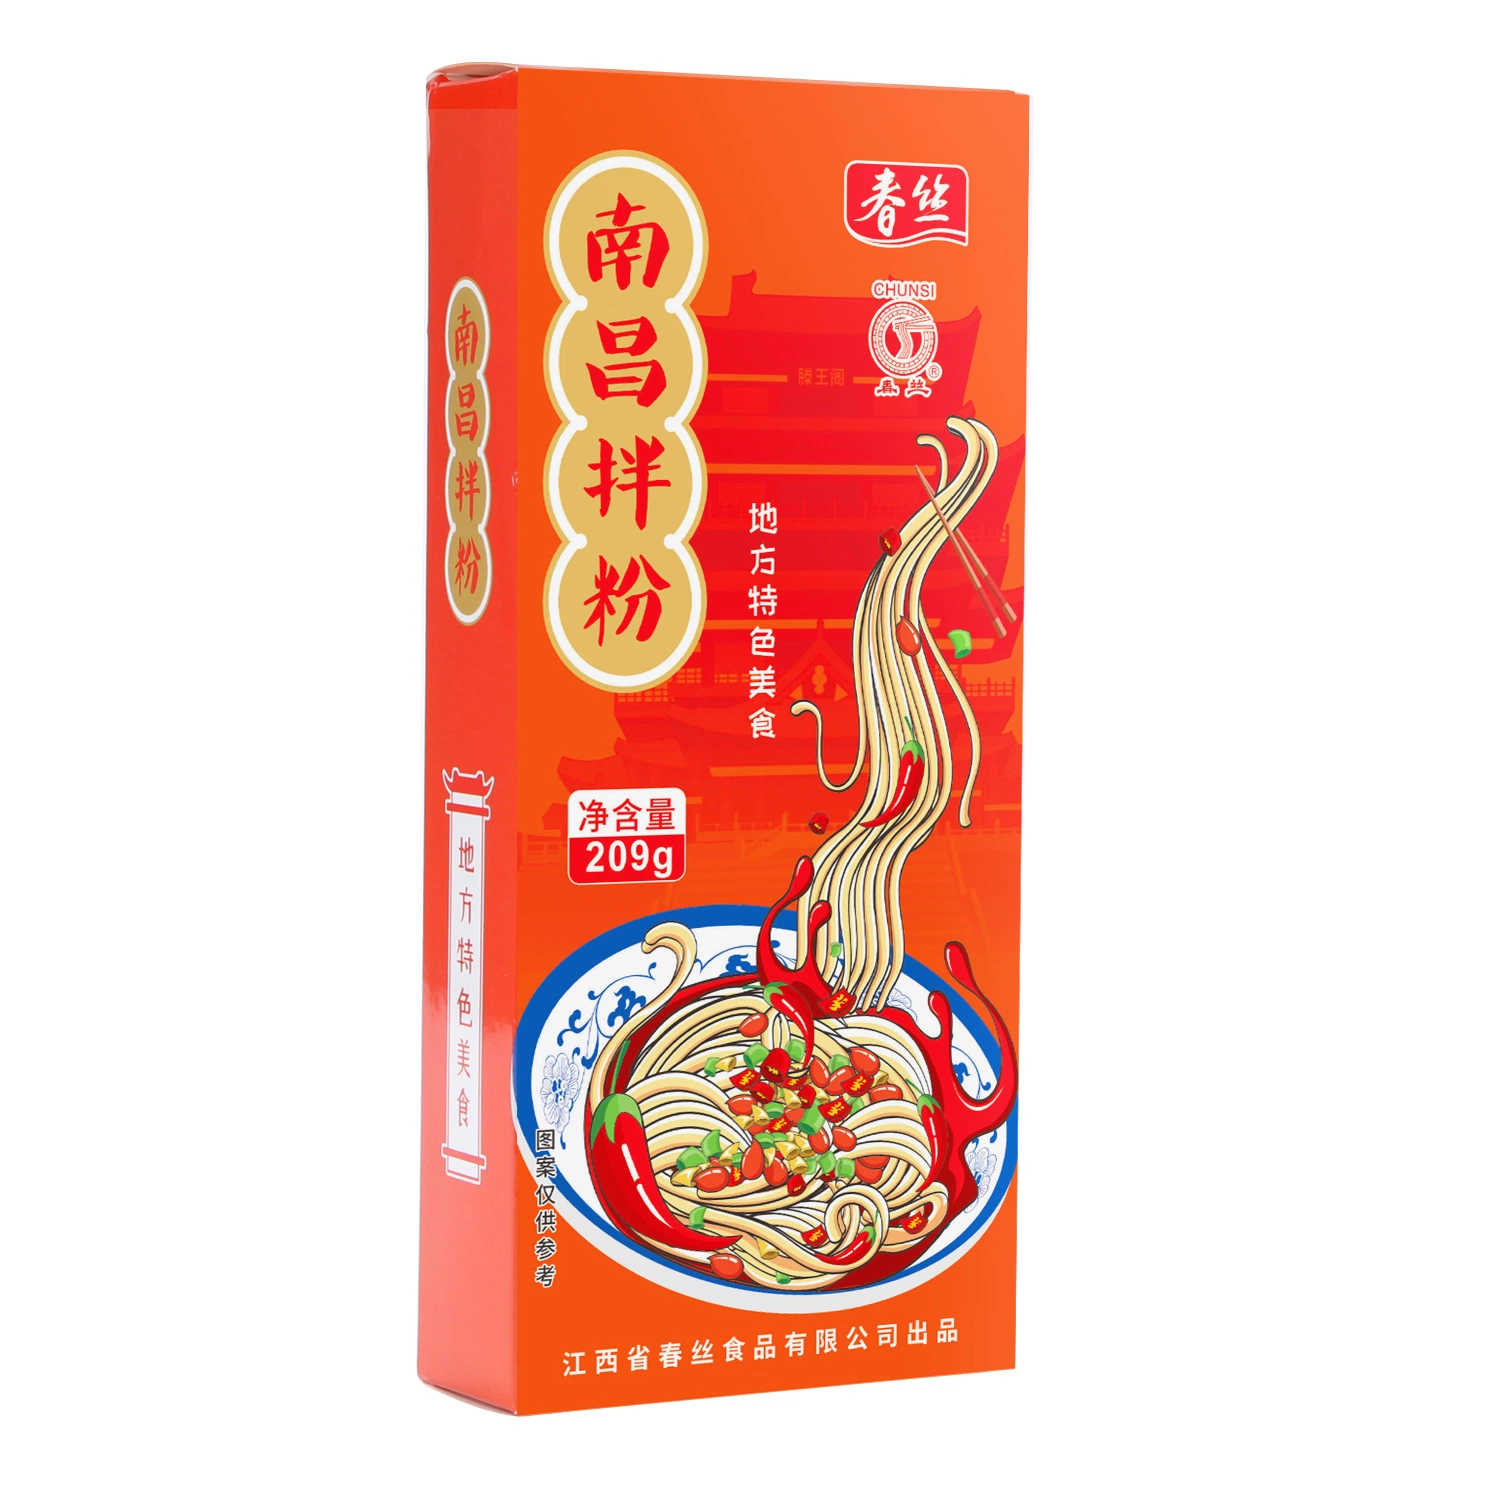 Chunsi Nanchang Instant Food Spicy Local Delicacies Mixed Flour Rice Vermicelli Hot Selling